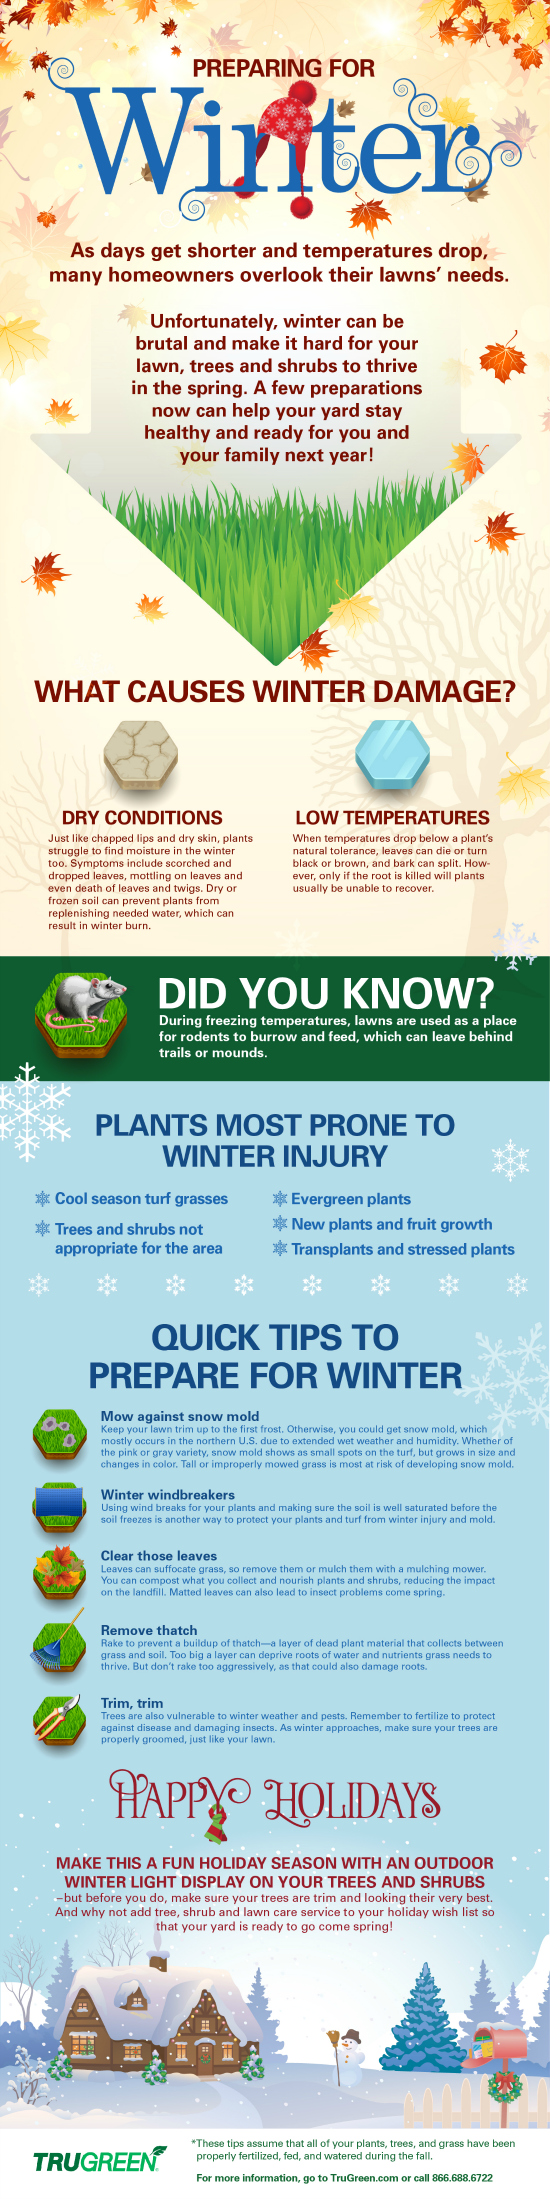 Winter Lawn Care Tips from TruGreen